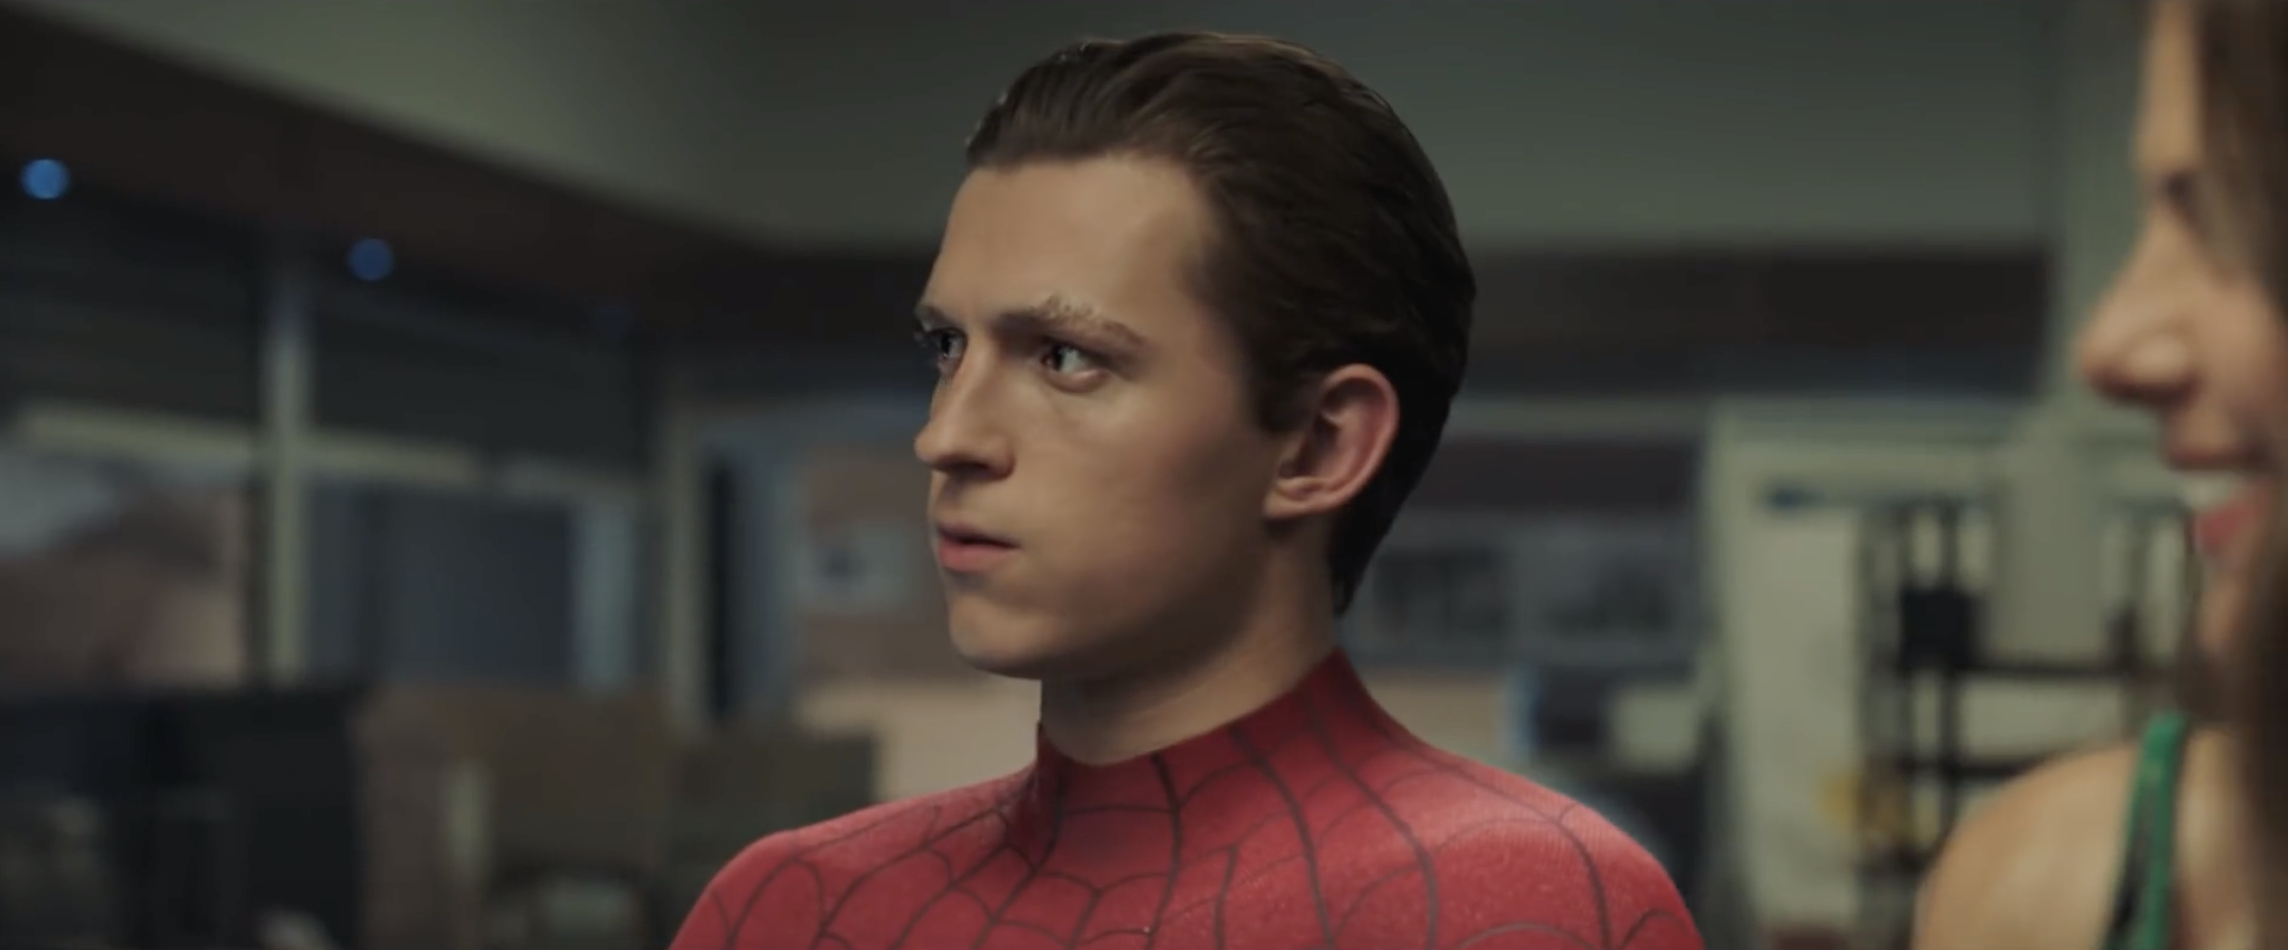 Spider-Man: Far From Home – Tom Holland Says Working With Director Jon Watts For A Second Time Made For A Smoother Production